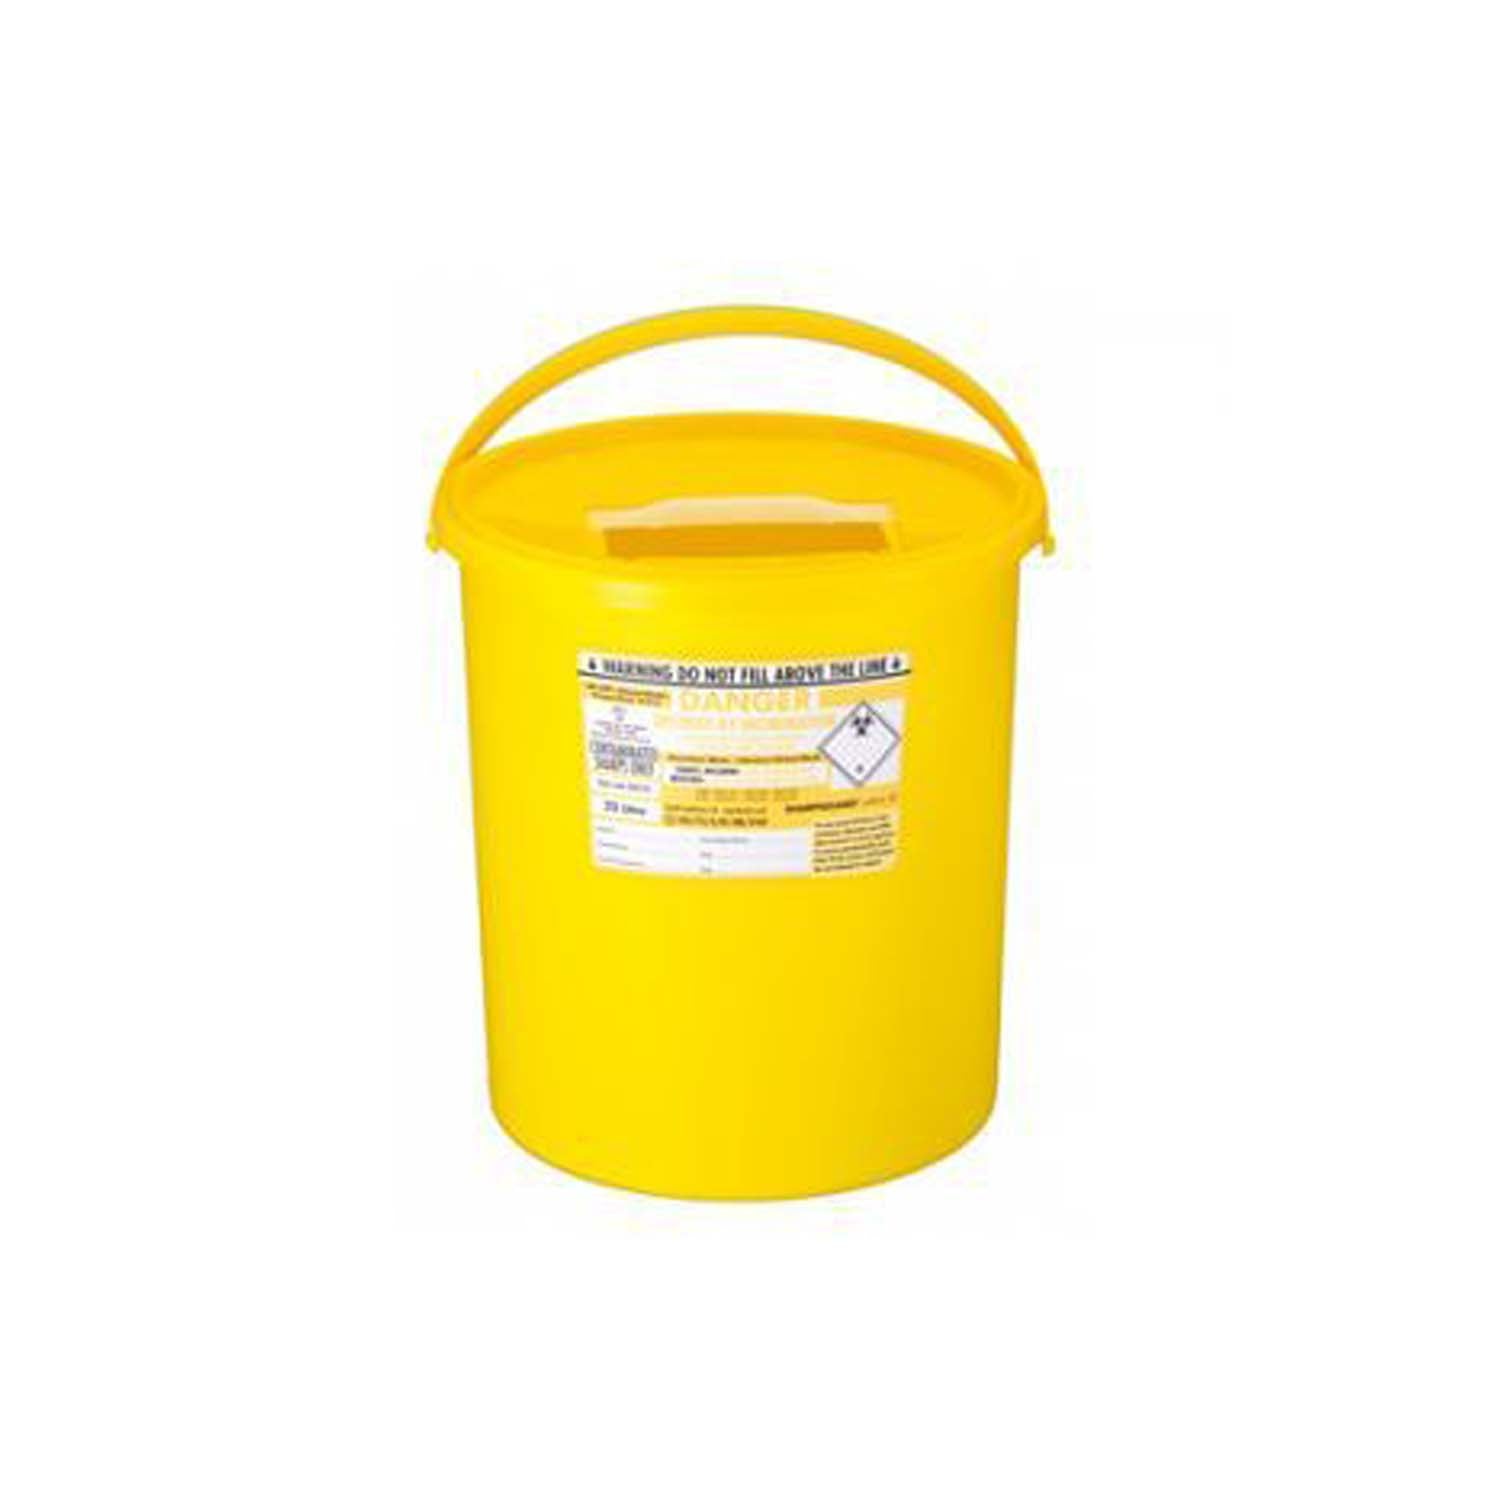 Sharpsguard Sharps Container | 22L | Yellow Lid | Pack of 10